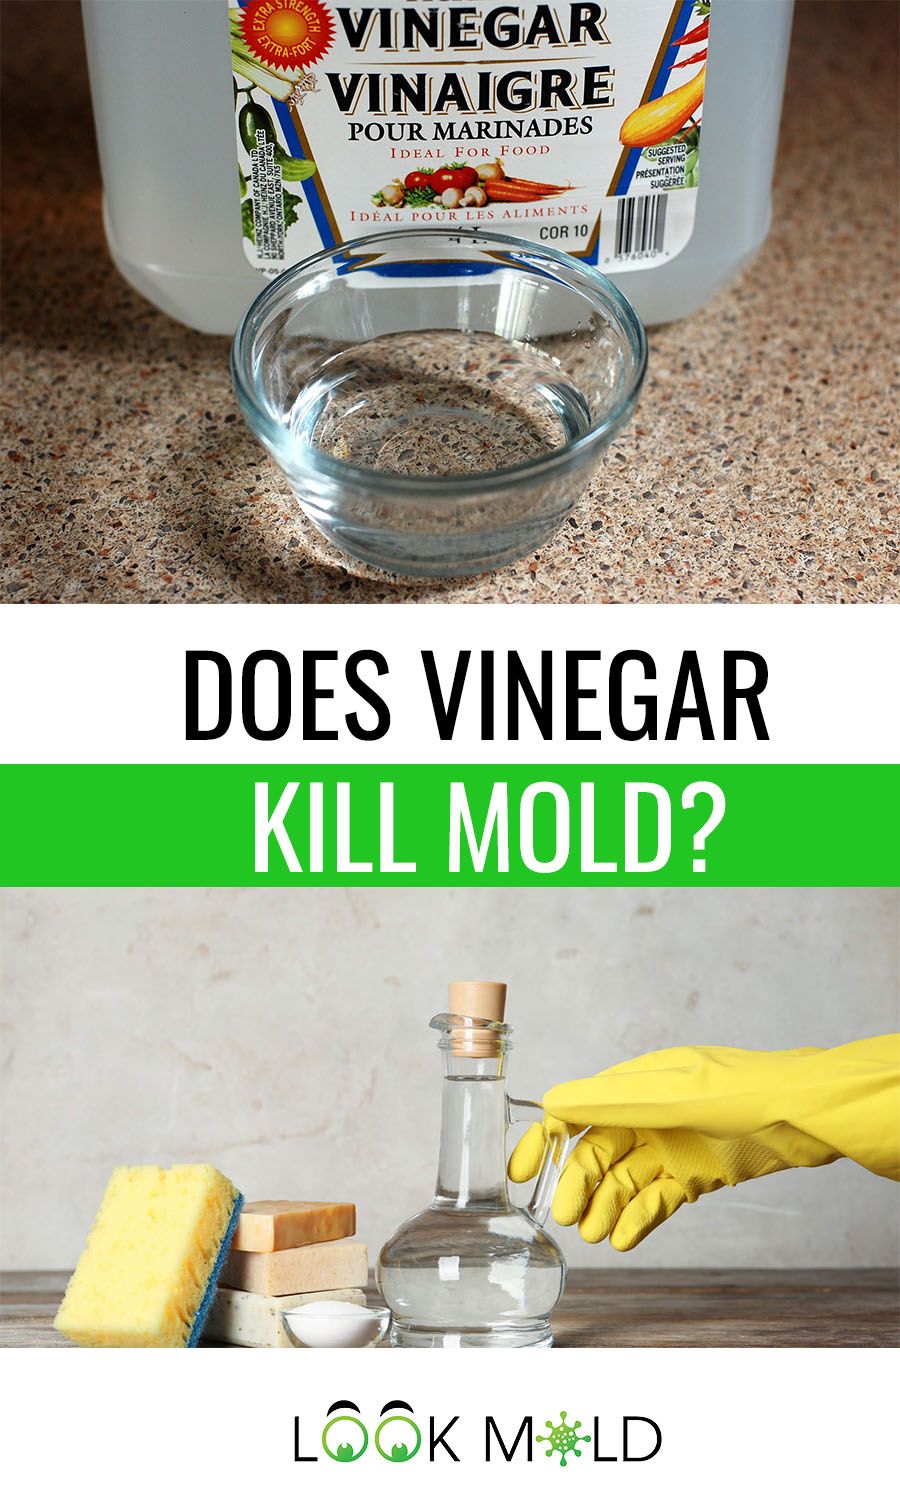 Does Vinegar Kill Mold? What You Need To Know in 2020